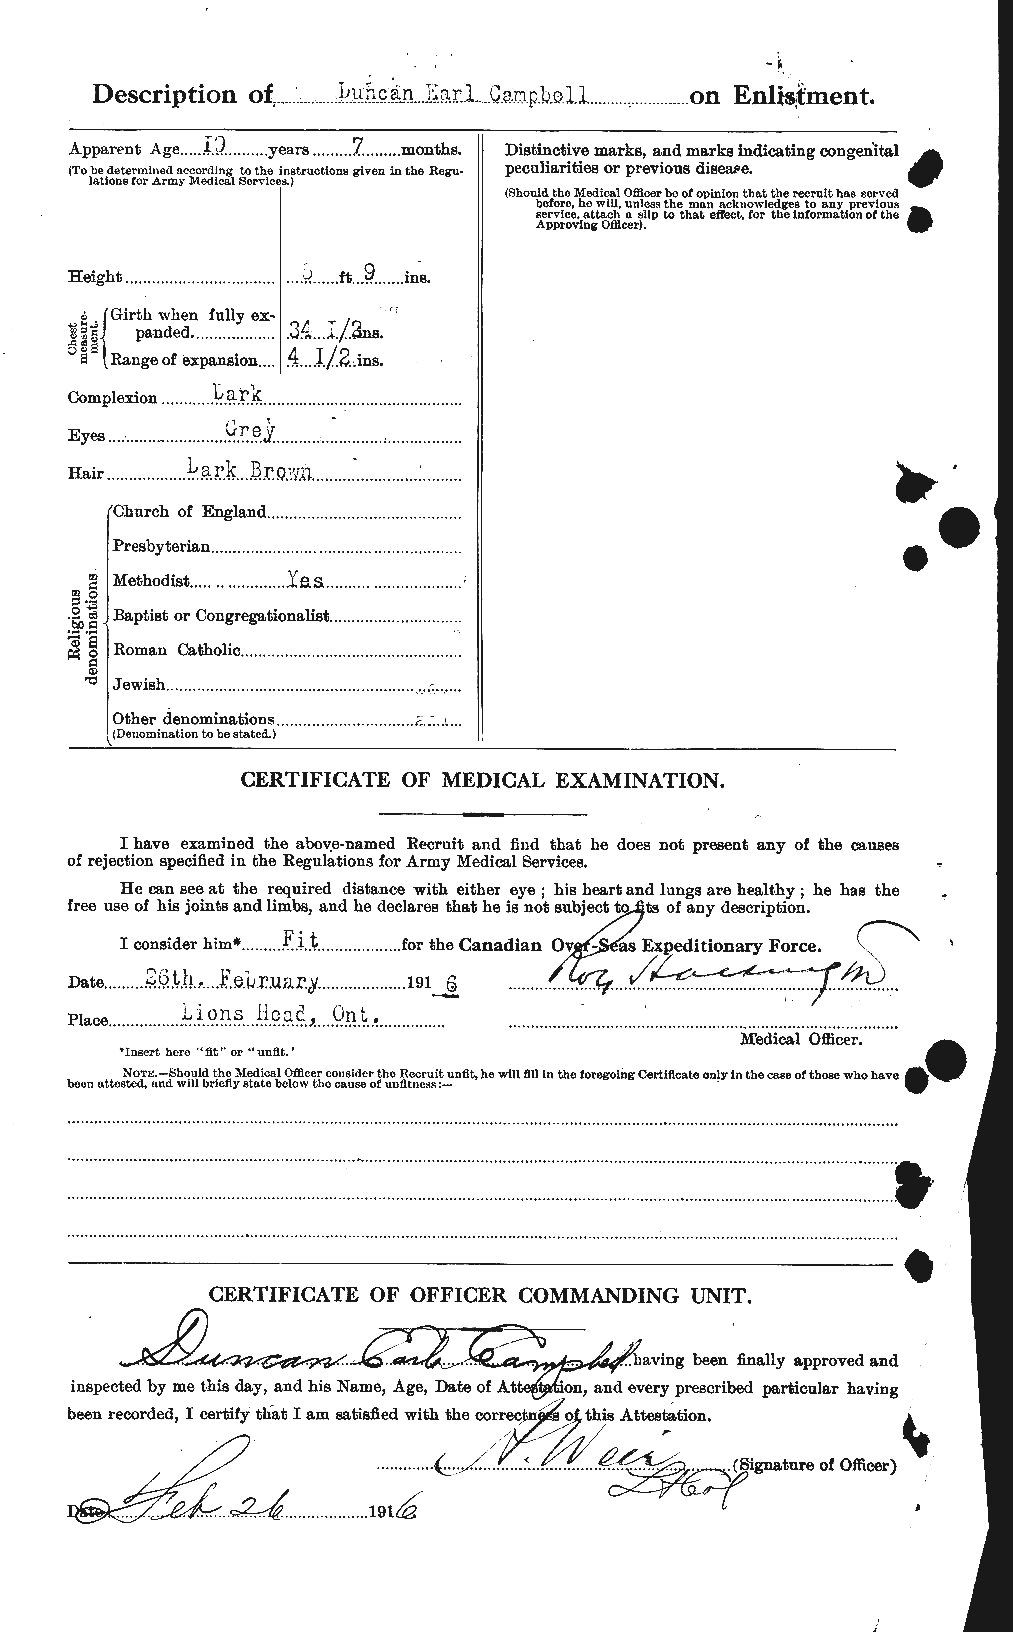 Personnel Records of the First World War - CEF 008219b